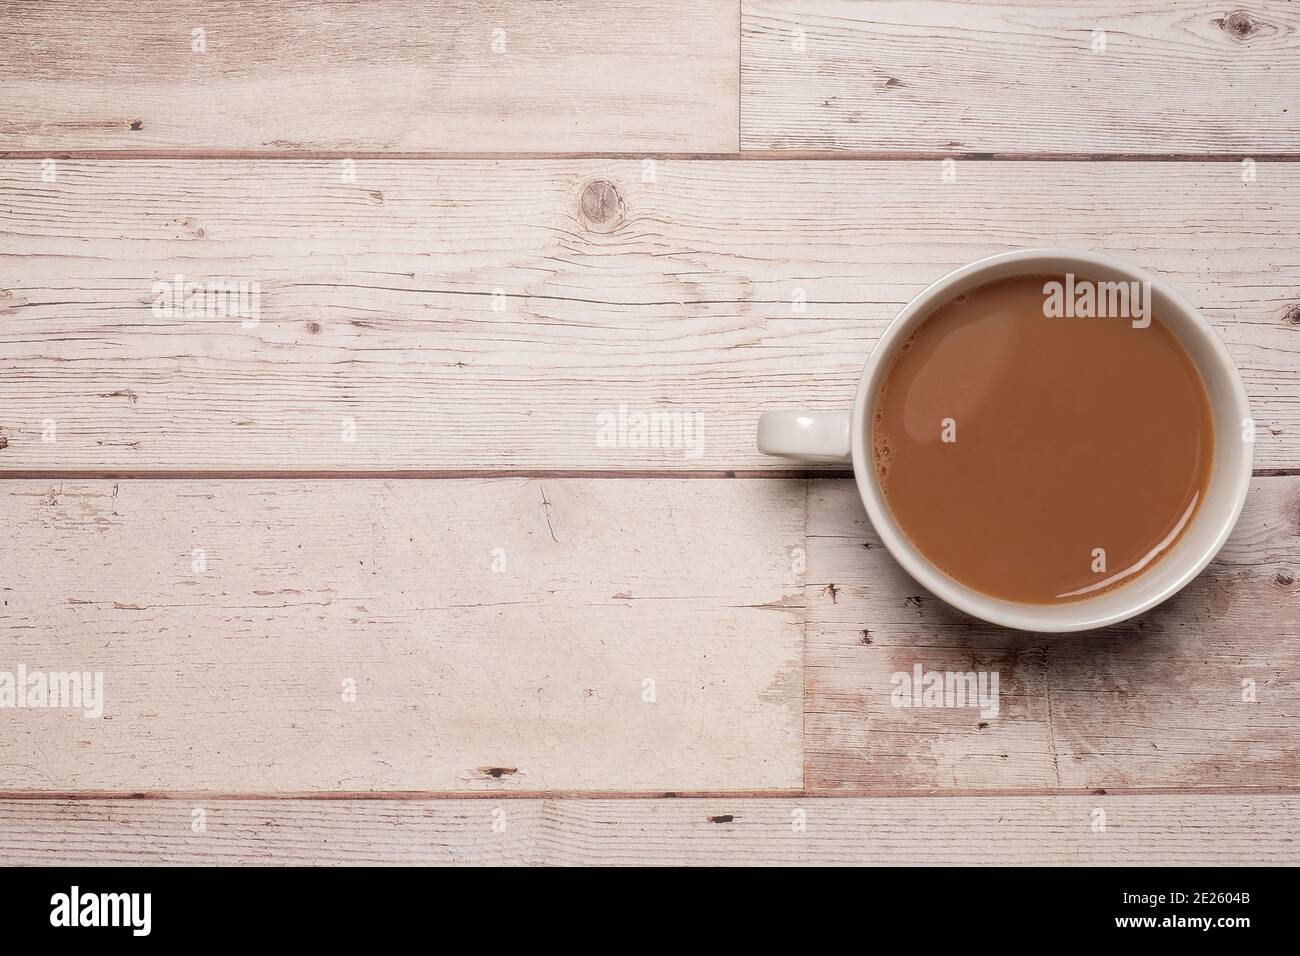 Cup of strong tea or coffee with milk in a white mug on a textured white wooden table surface with copy space and room for text. Stock Photo